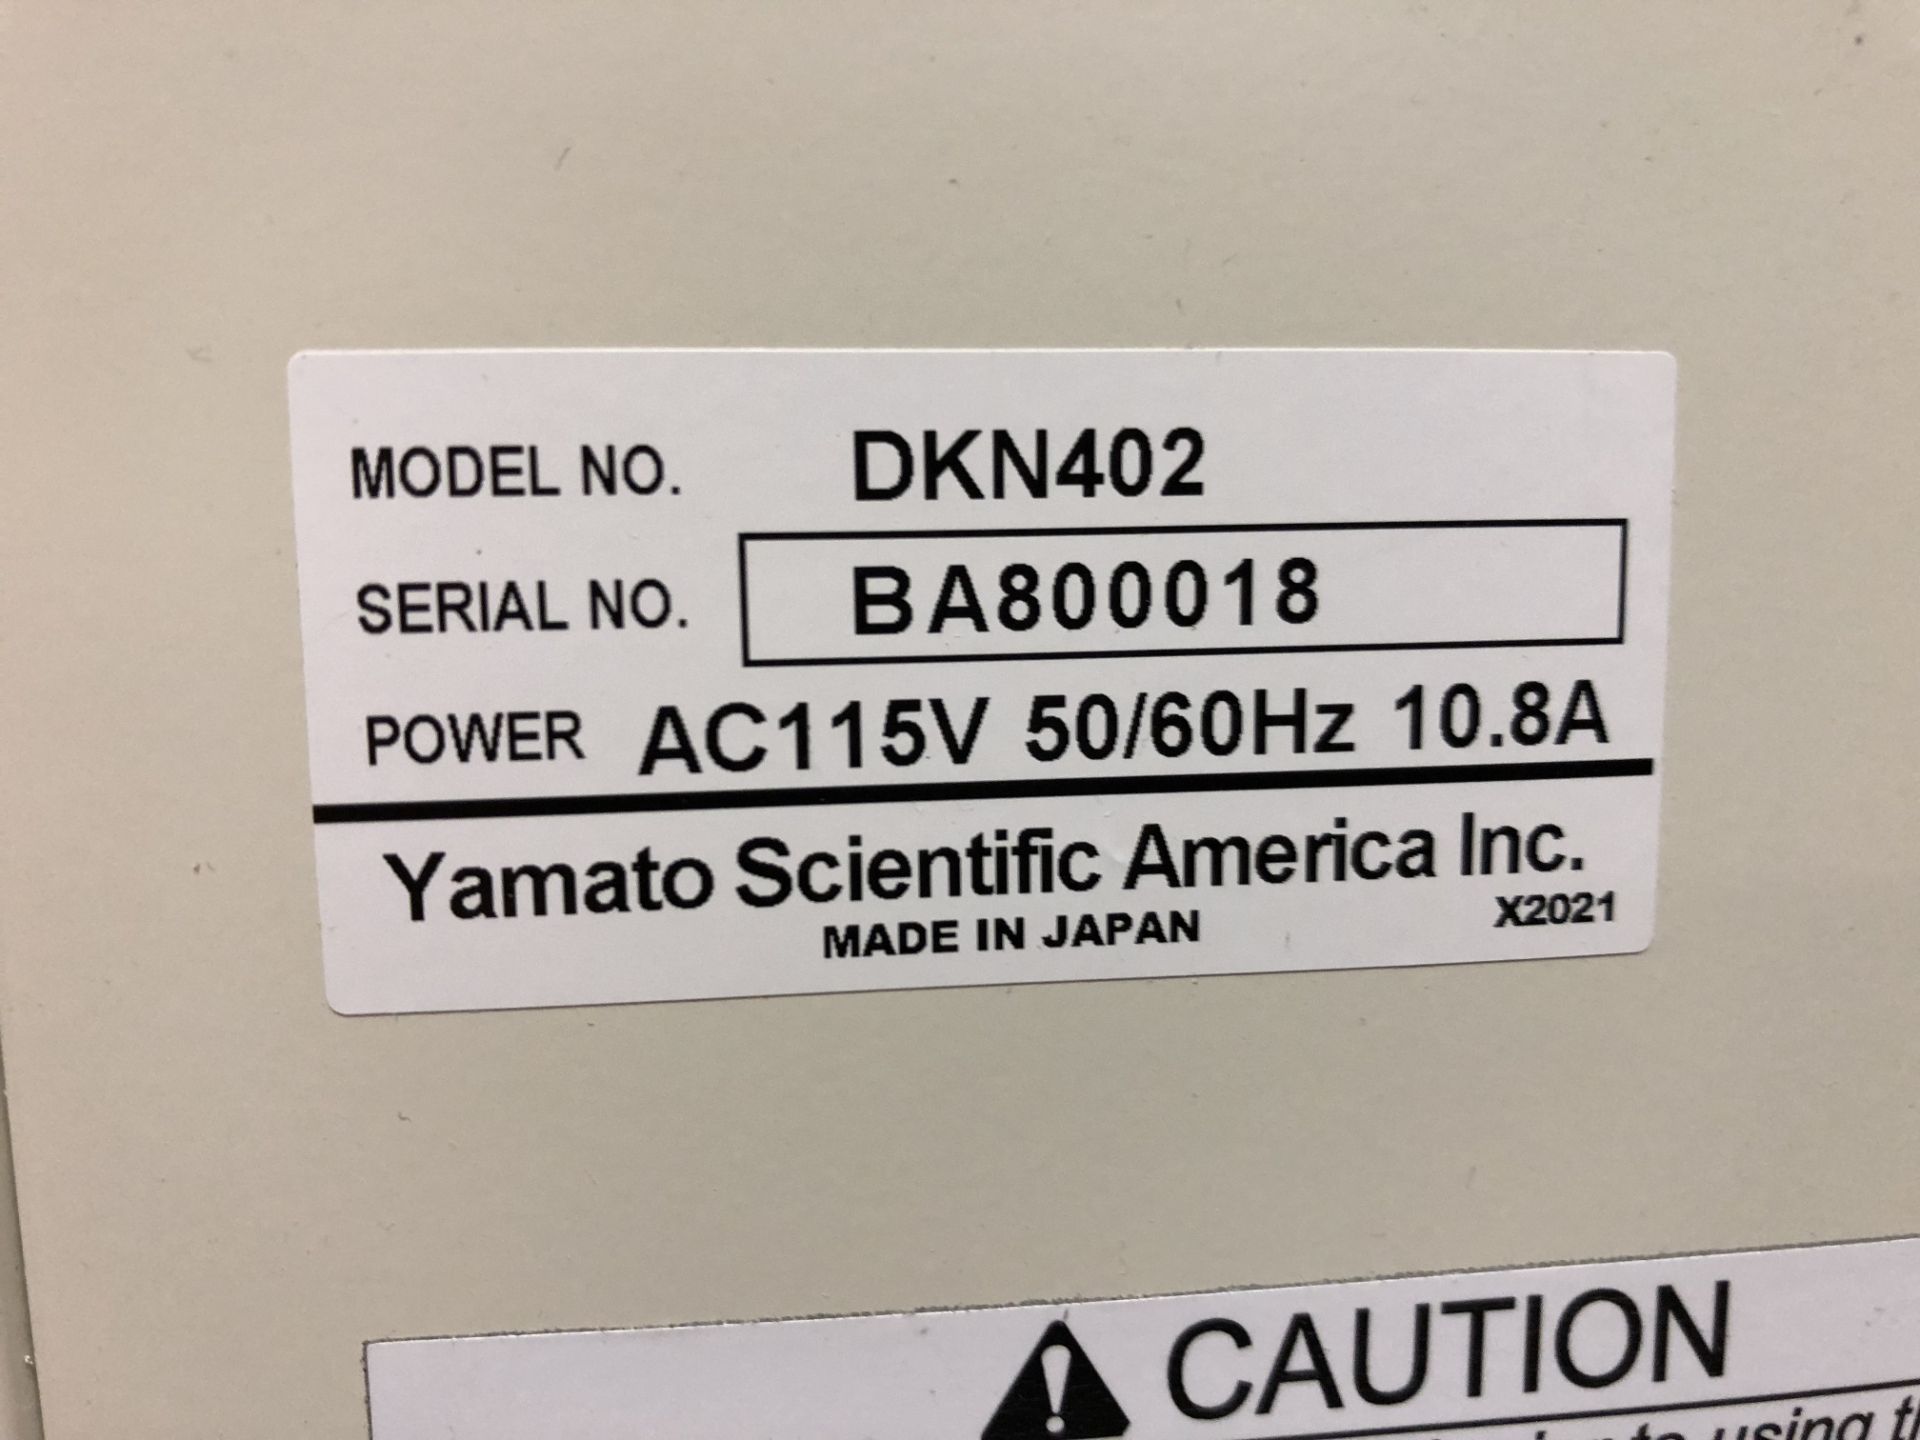 Yamato DKN402 Constant Temperature Oven, S/N BA800018 - Image 4 of 4